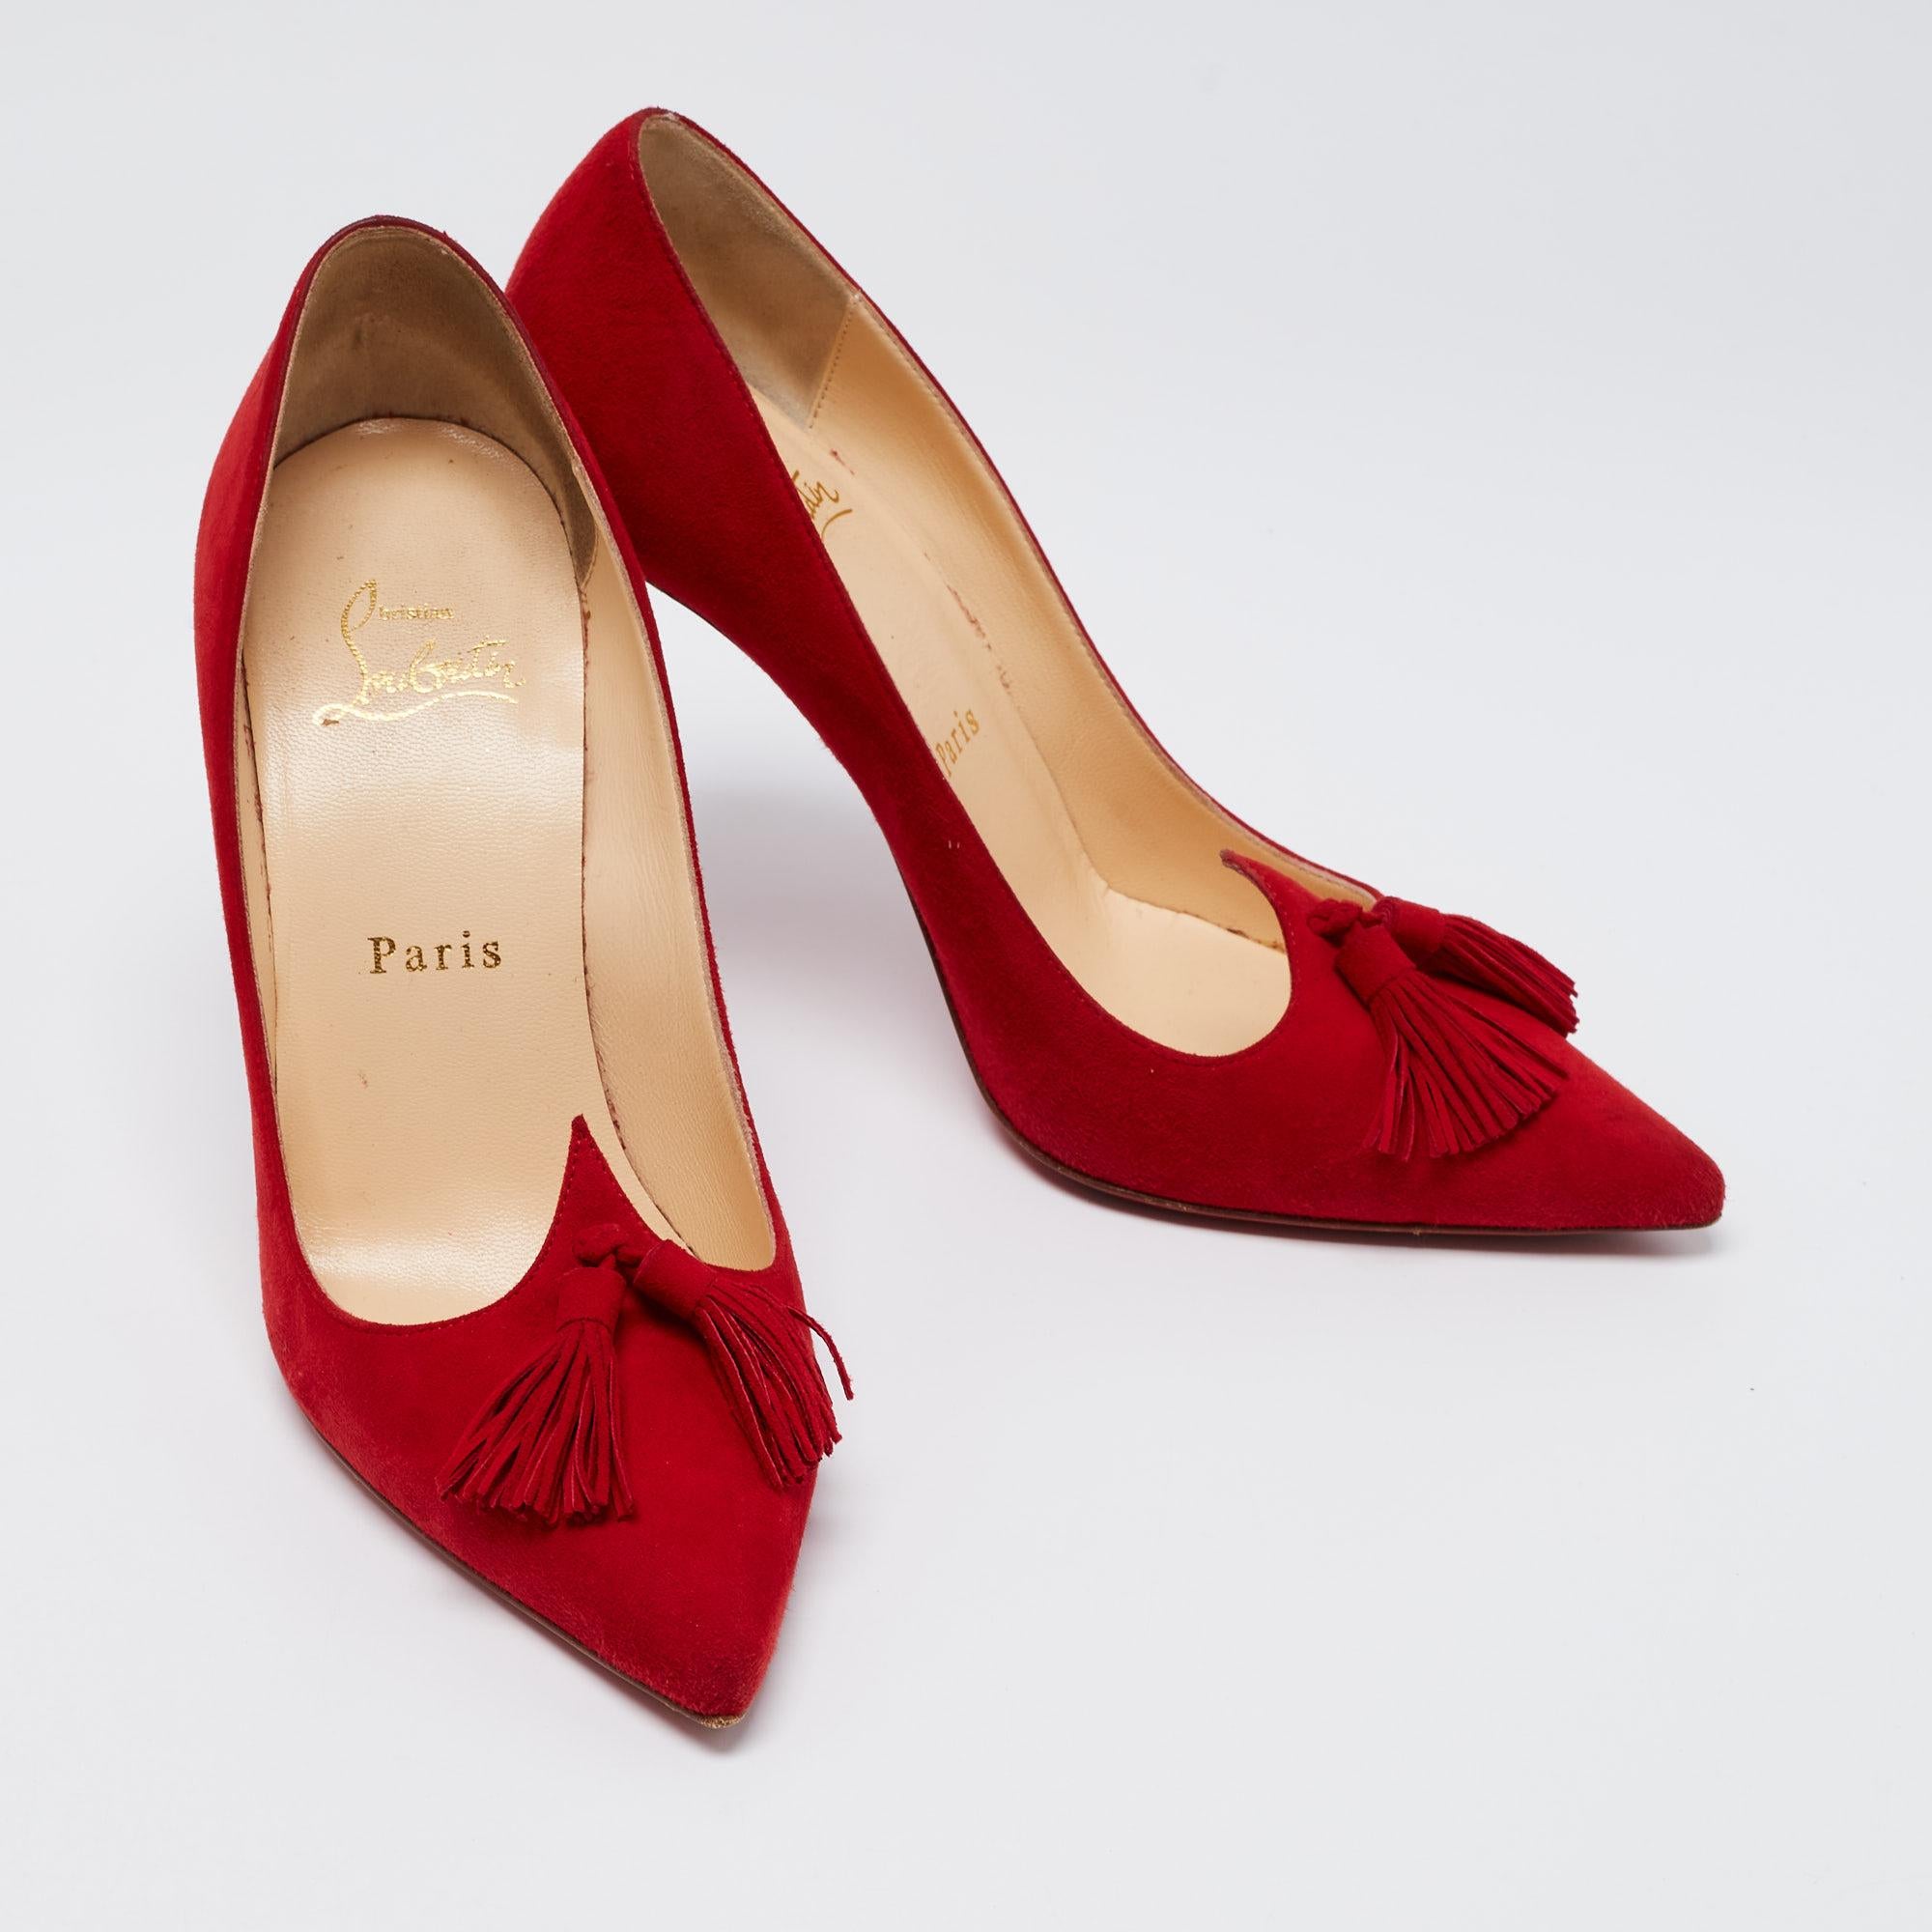 These pointed-toe pumps from Christian Louboutin have come straight from a shoe lover's dream. Crafted from red suede, detailed with tassels, and balanced on 10 cm heels, the pumps are lovely and gorgeous!

